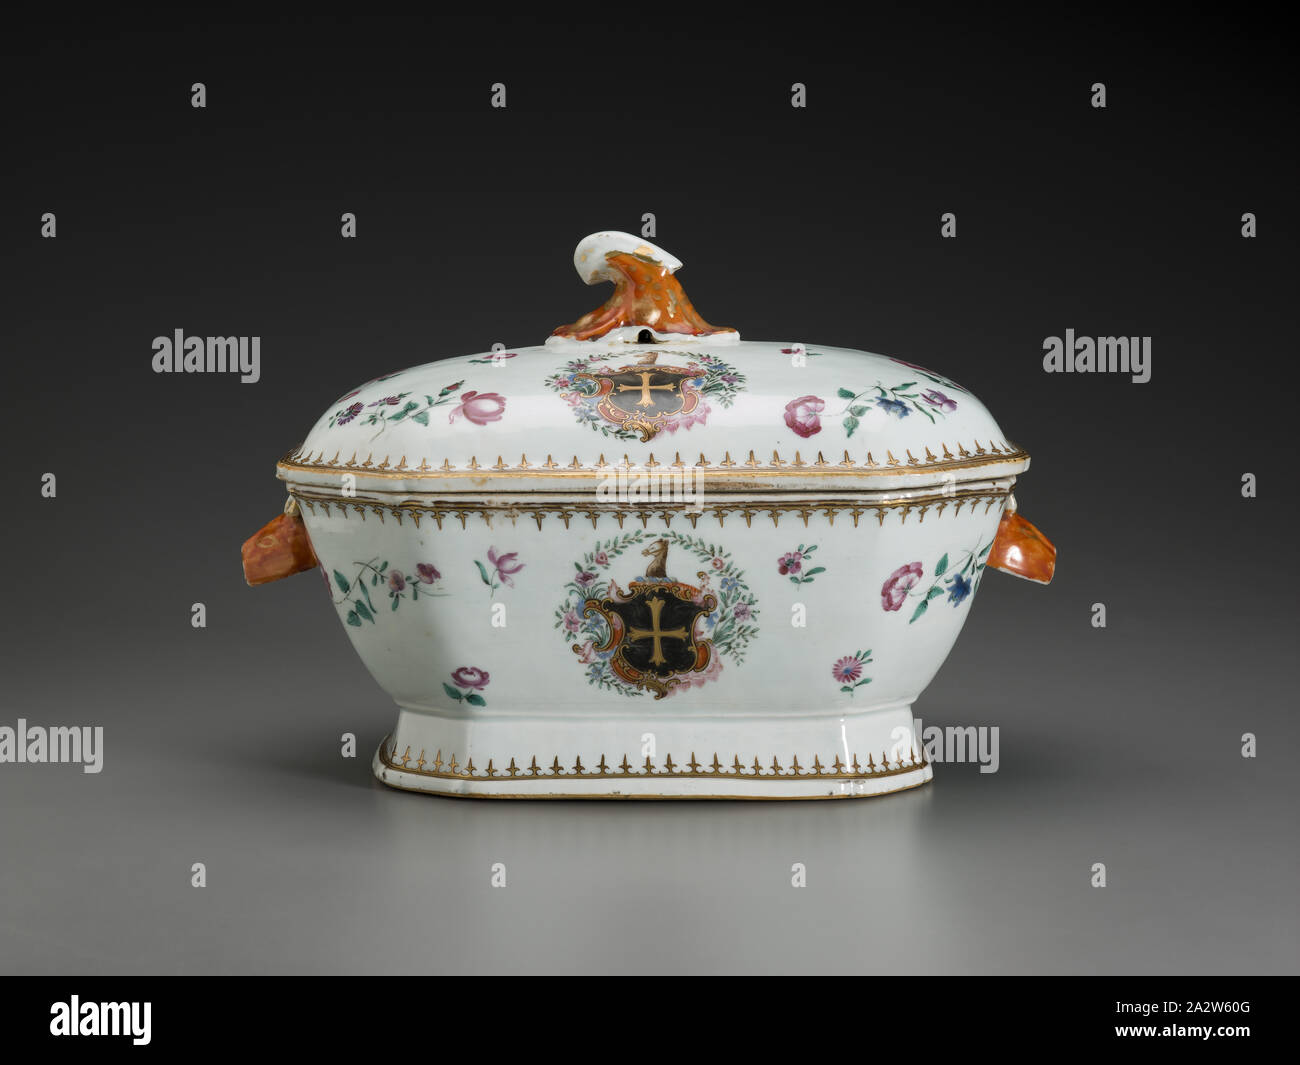 soup tureen with lid and underplate, about 1770, porcelain, A) underplate:11-3/8 x 14-3/4 x 2-1/8 in. B) tureen: 4-15/16 x 13-1/4 x 8-3/8 in. C) lid: W: 11-15/16 in., Design Arts Stock Photo